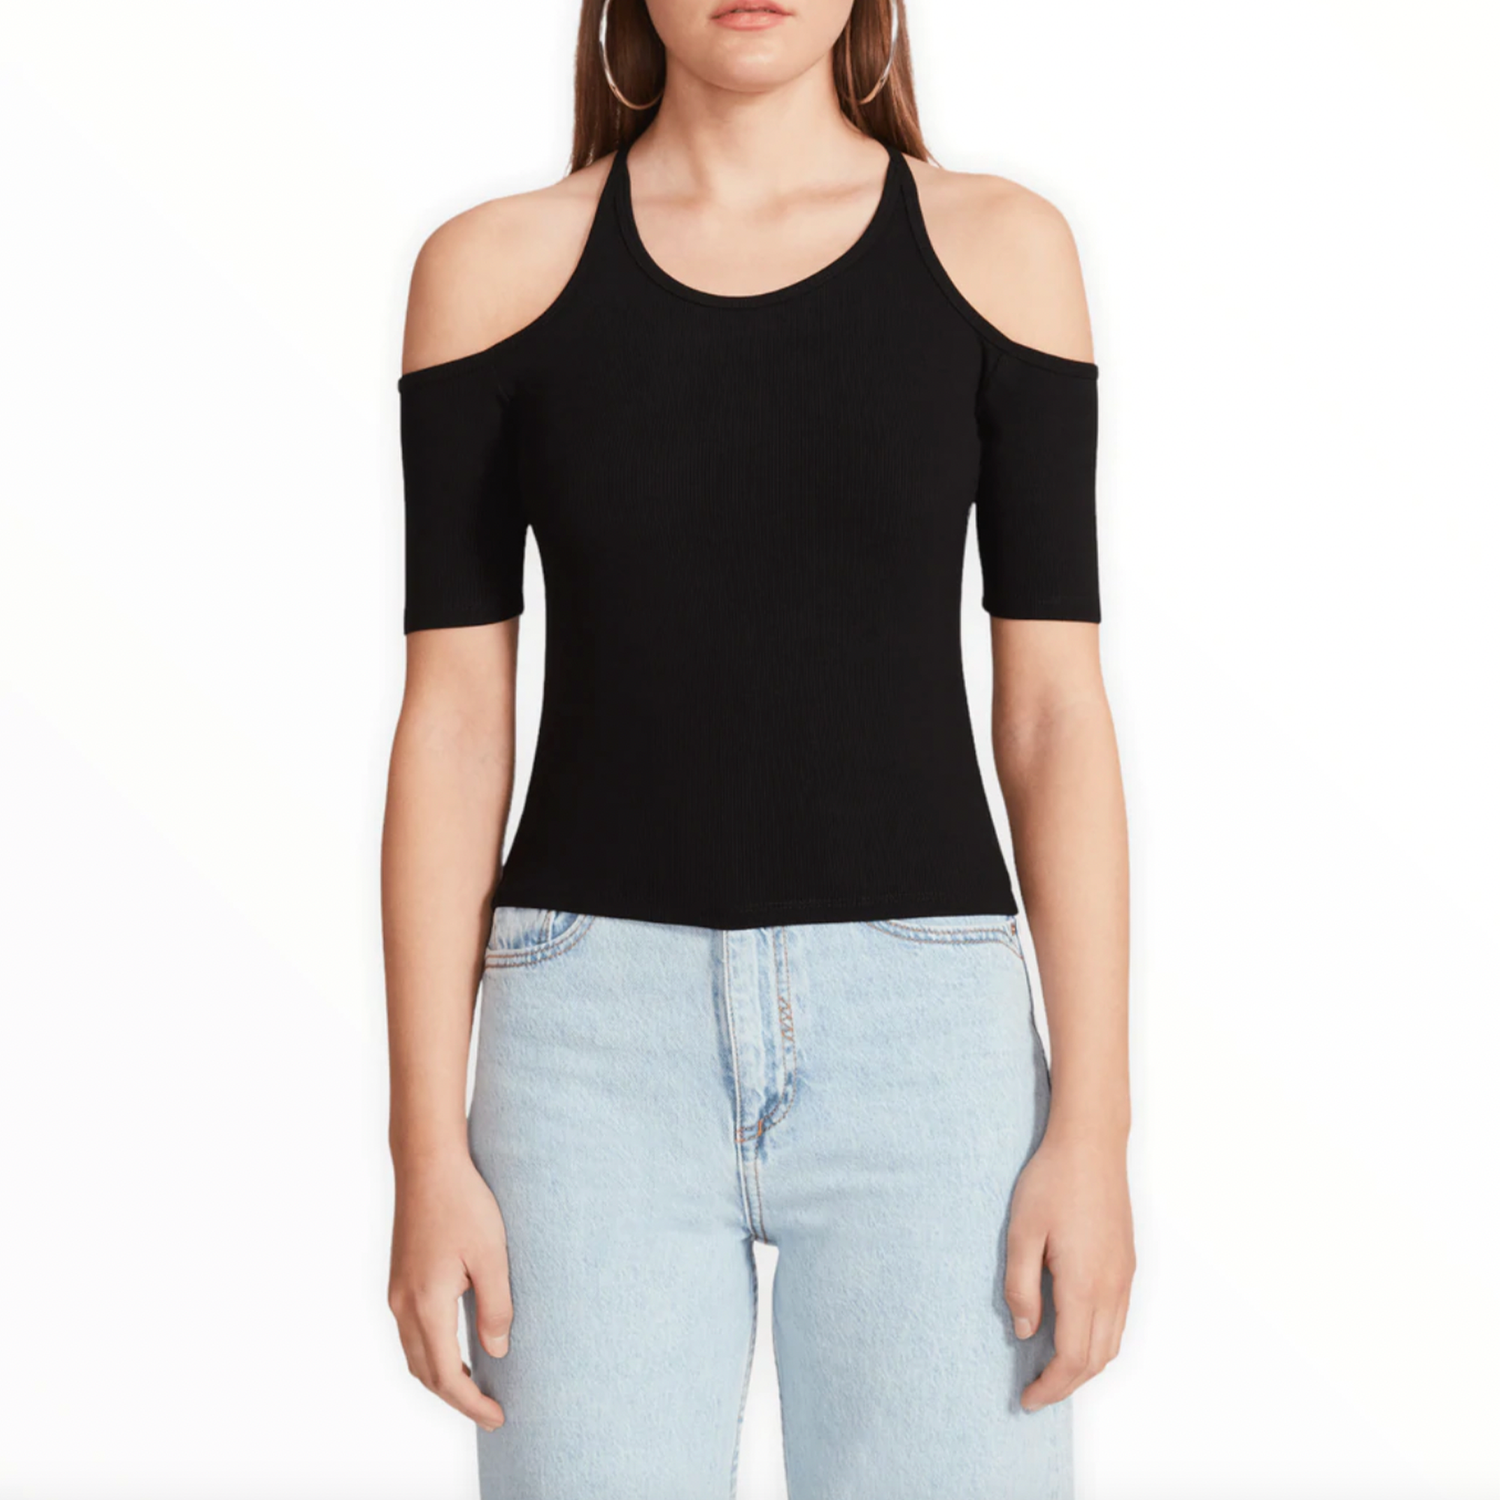 BB Dakota Chic in the Streets Top. Amp up your style wearing this relaxed, yet chic top from BB Dakota